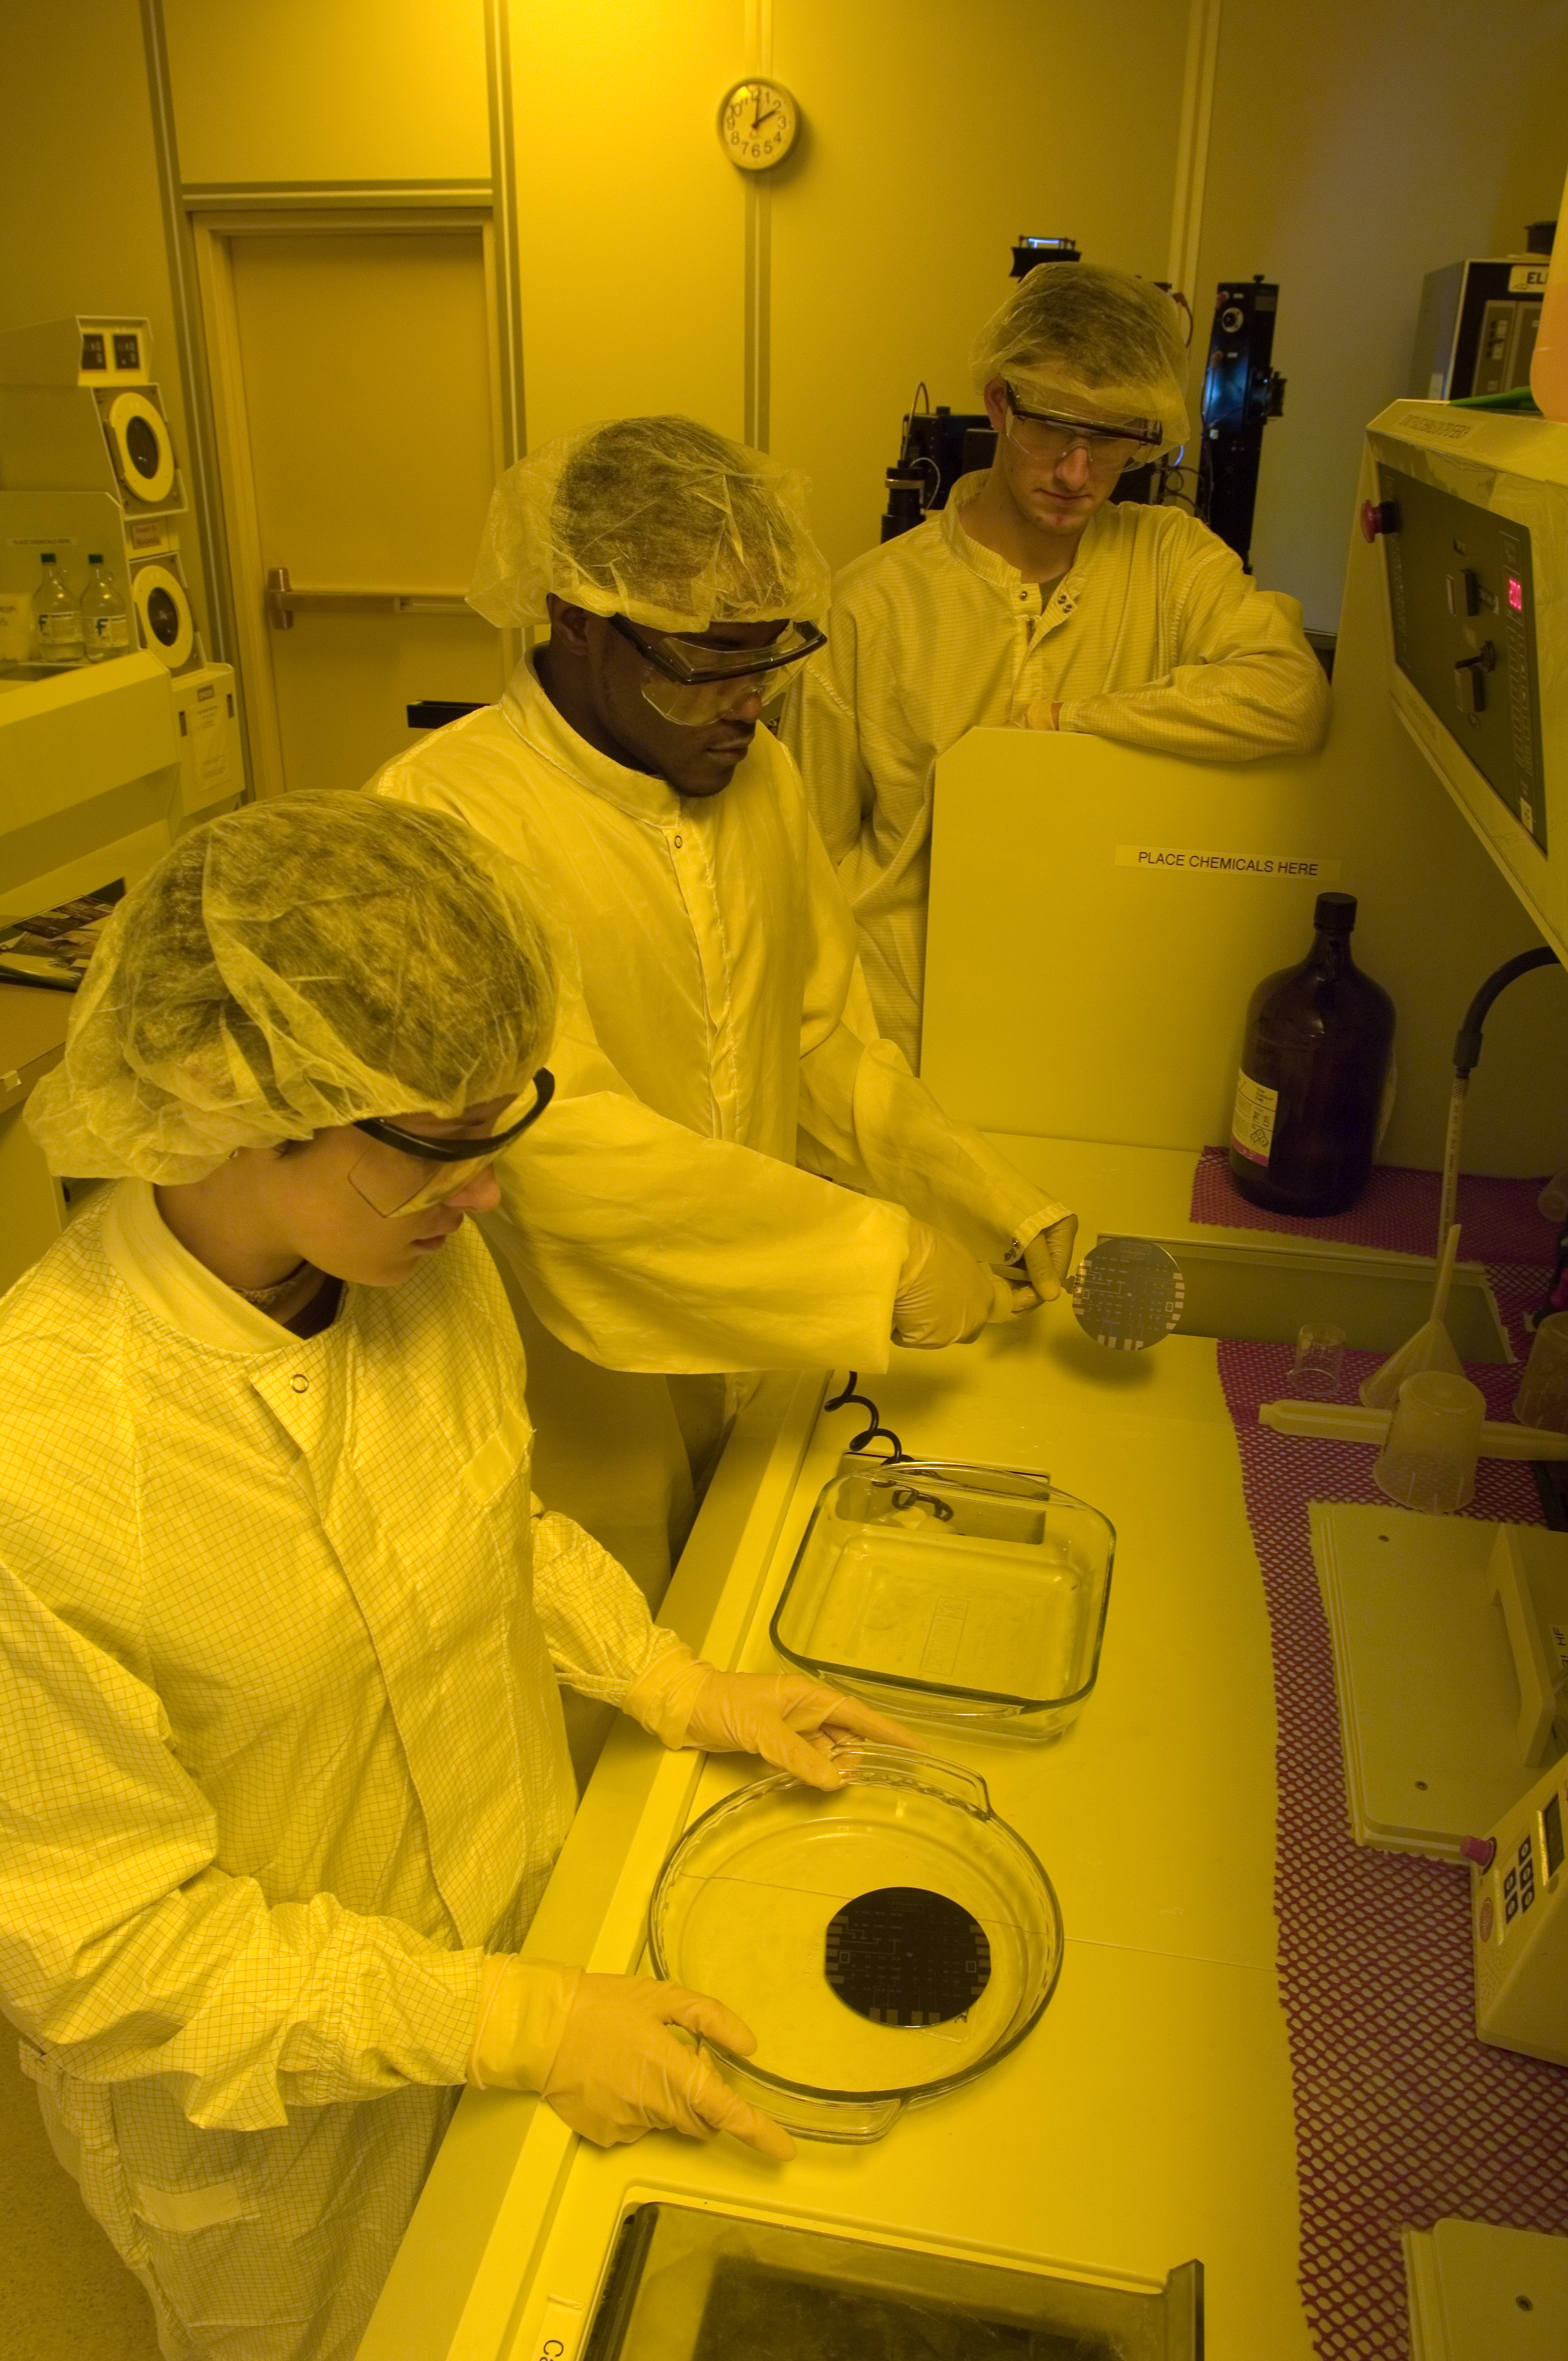 Researchers with the C. Kenneth and Dianne Wright Center for Clinical and Translational Research clad in protective gear, examining a lab specimen.